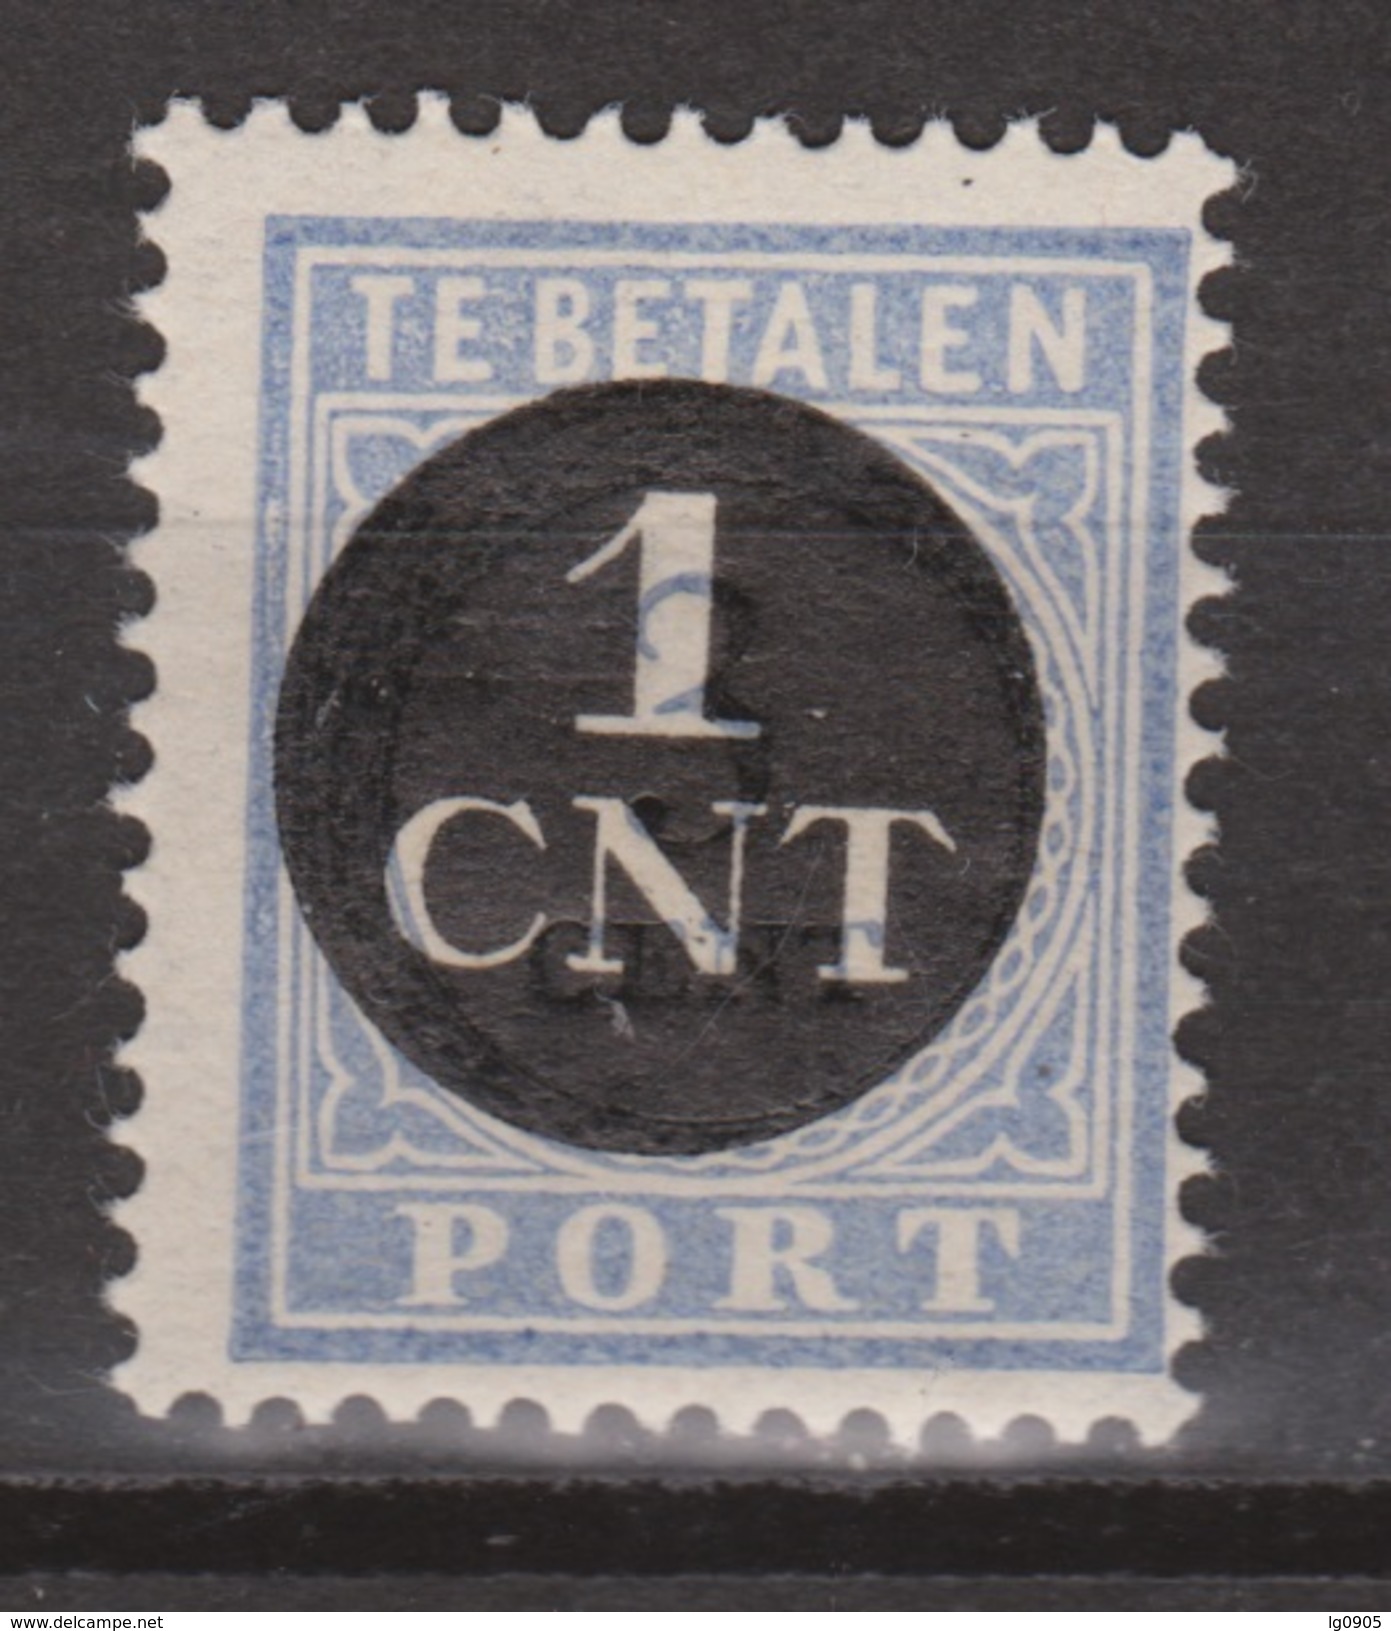 NVPH Nederland Netherlands Holanda Pays Bas Port 61 MLH Timbre-taxe Postmarke Sellos De Correos NOW MANY DUE STAMPS - Postage Due